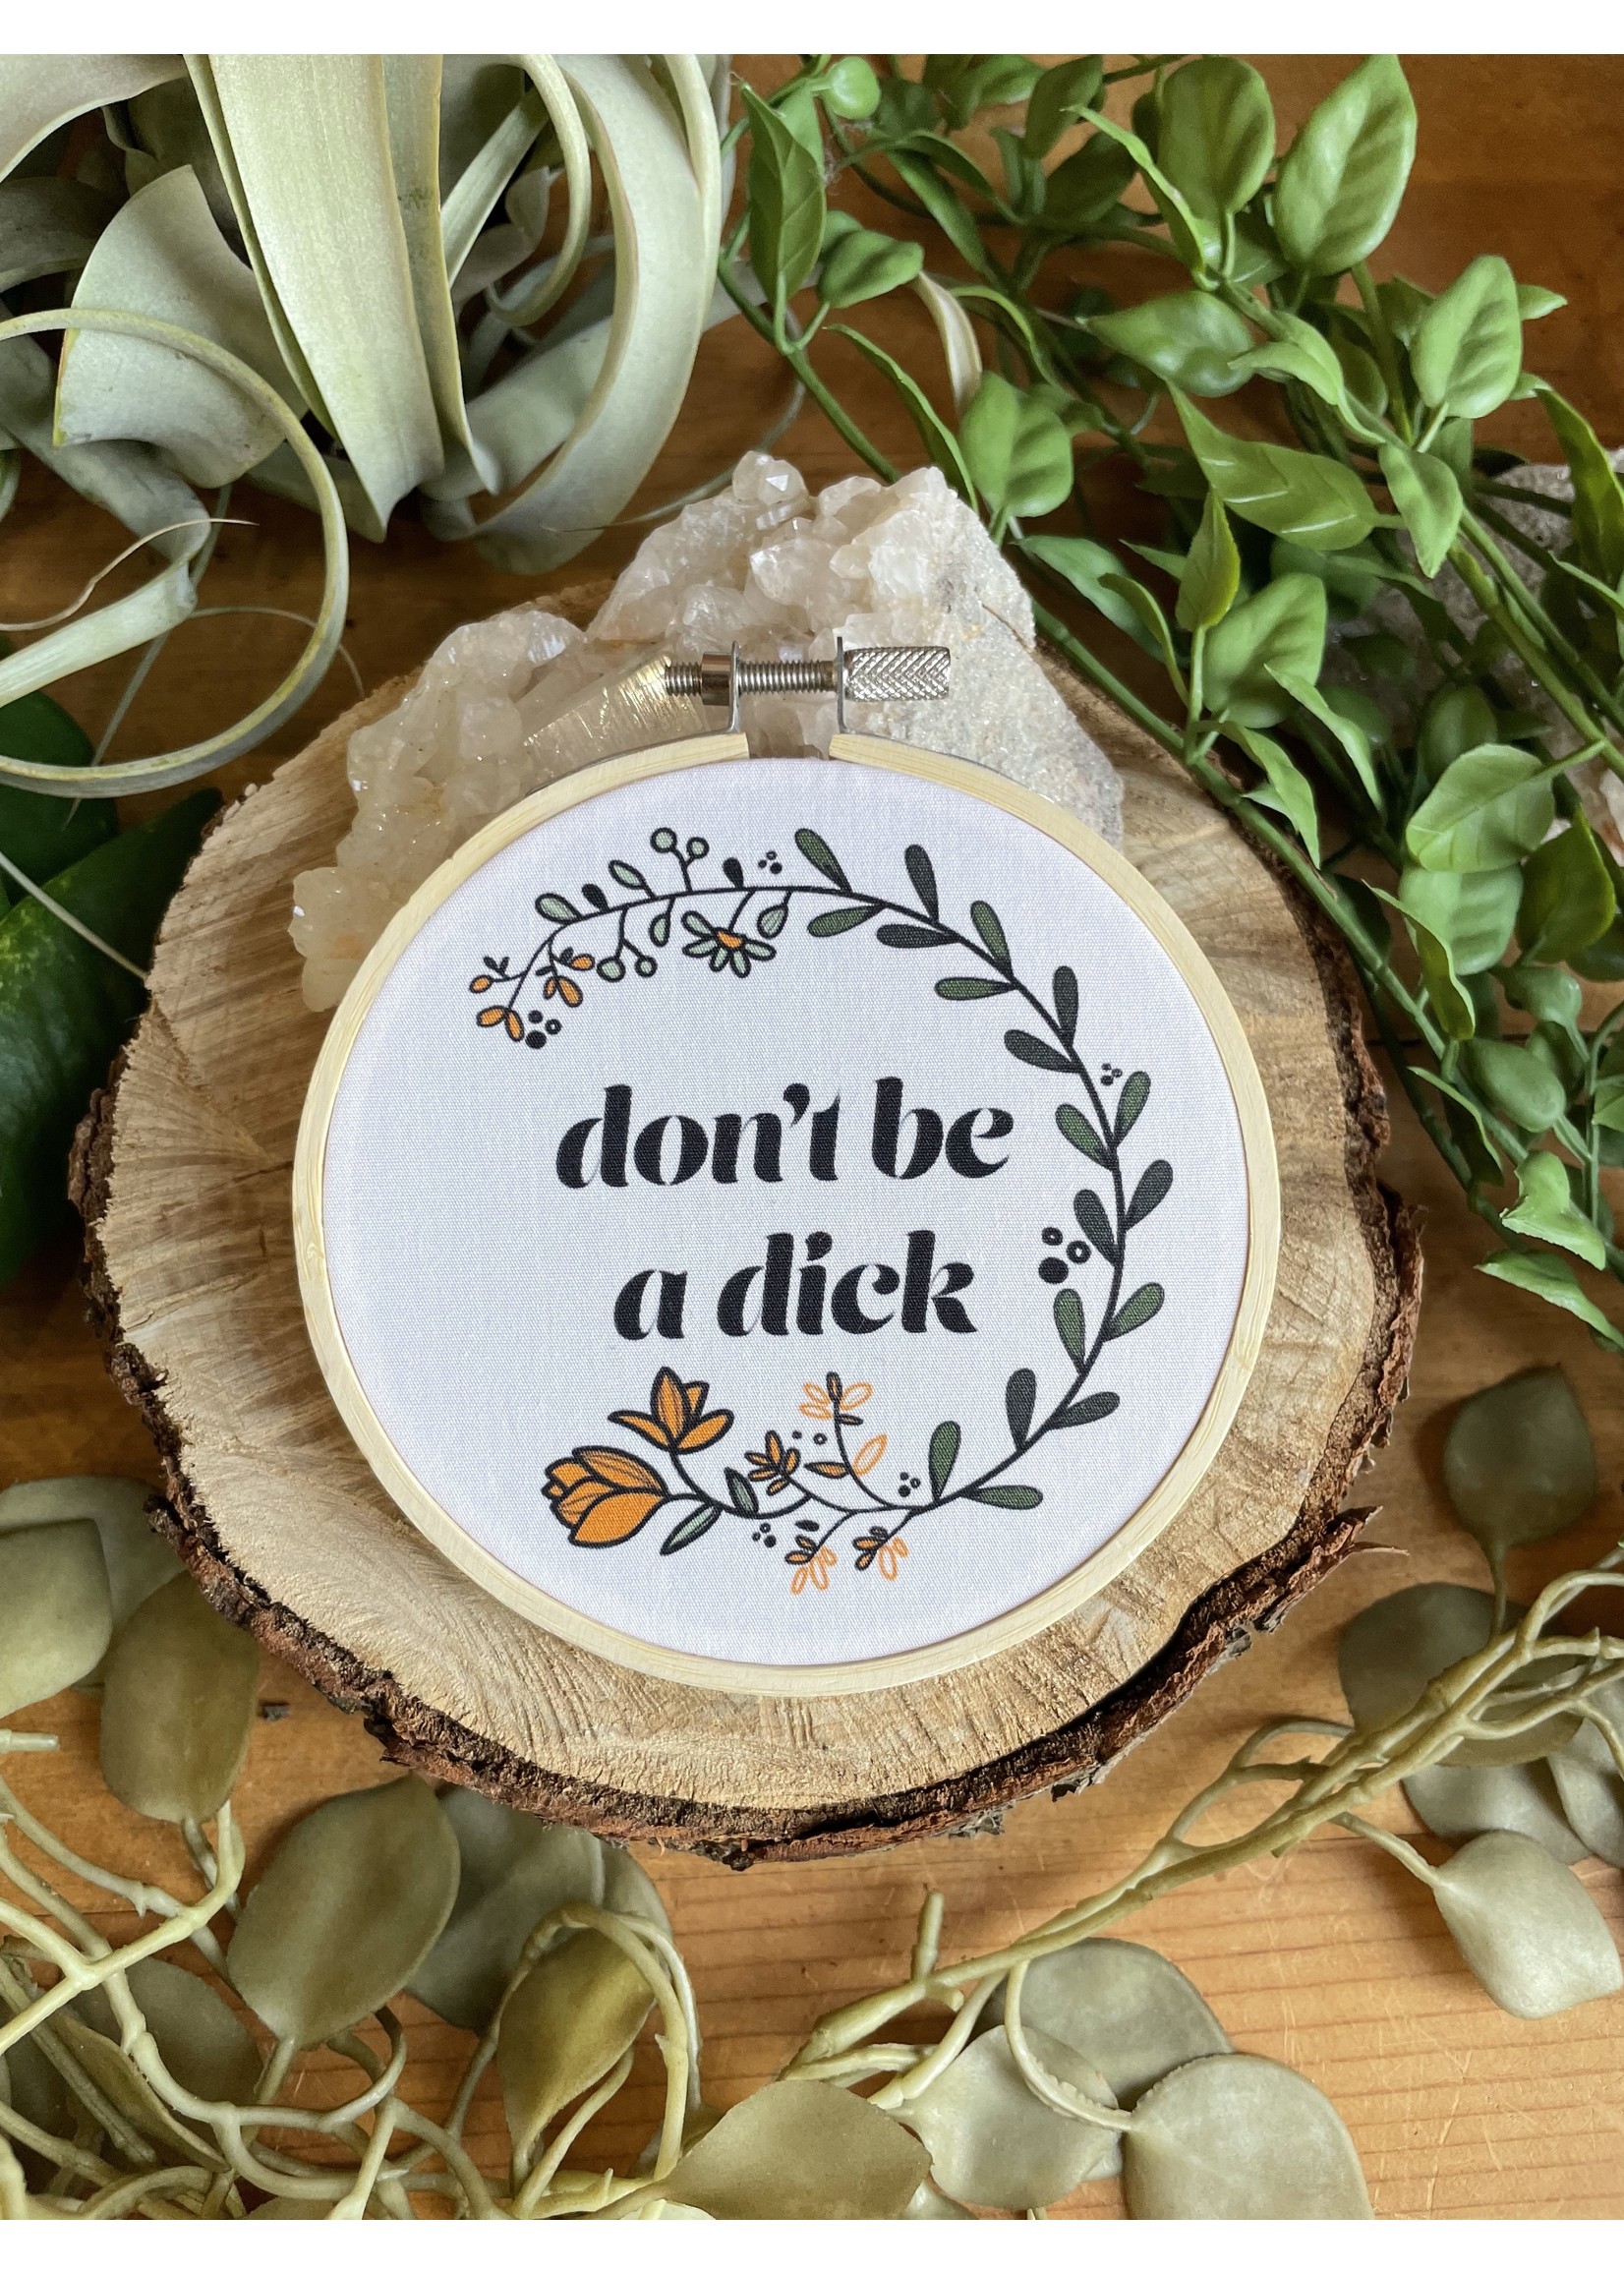 Tangled Up In Hue Wholesale Mini Fabric Hoop Don't Be a Dick